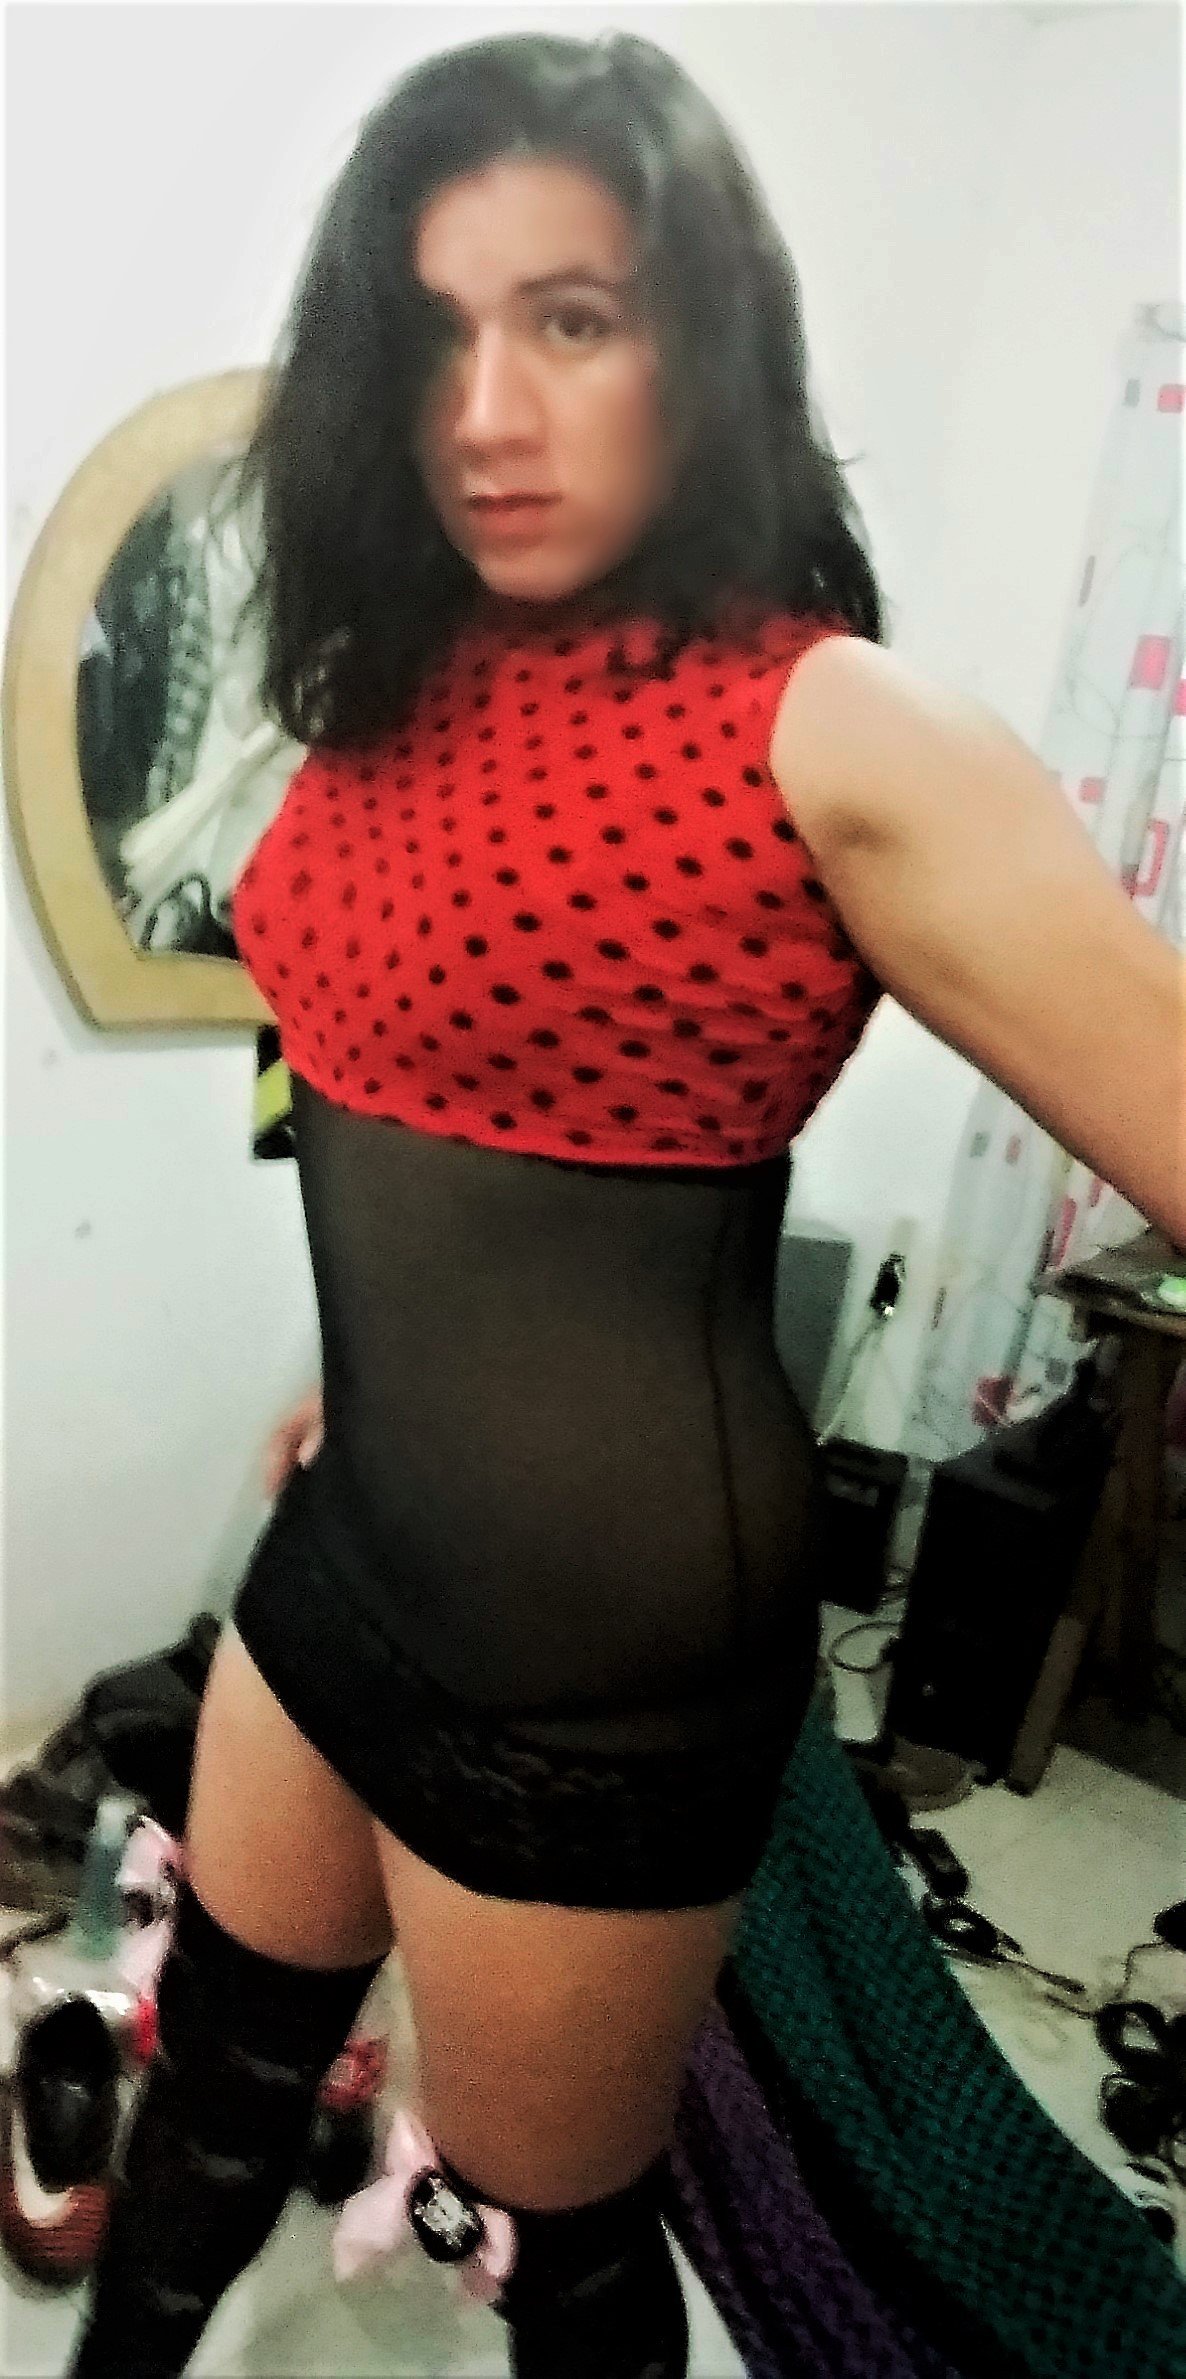 Photo by putitrans with the username @putitrans,  October 11, 2020 at 8:08 PM. The post is about the topic Trans and the text says 'I'M A BOY WHO LOVES WEARING CUTE LINGERIE #shemale #ladyboy #crossdresser #outdoor #trans #tgirl #flashing #sissy #trap #trapito #hemale #femboy #fembow #crossdress #cd'